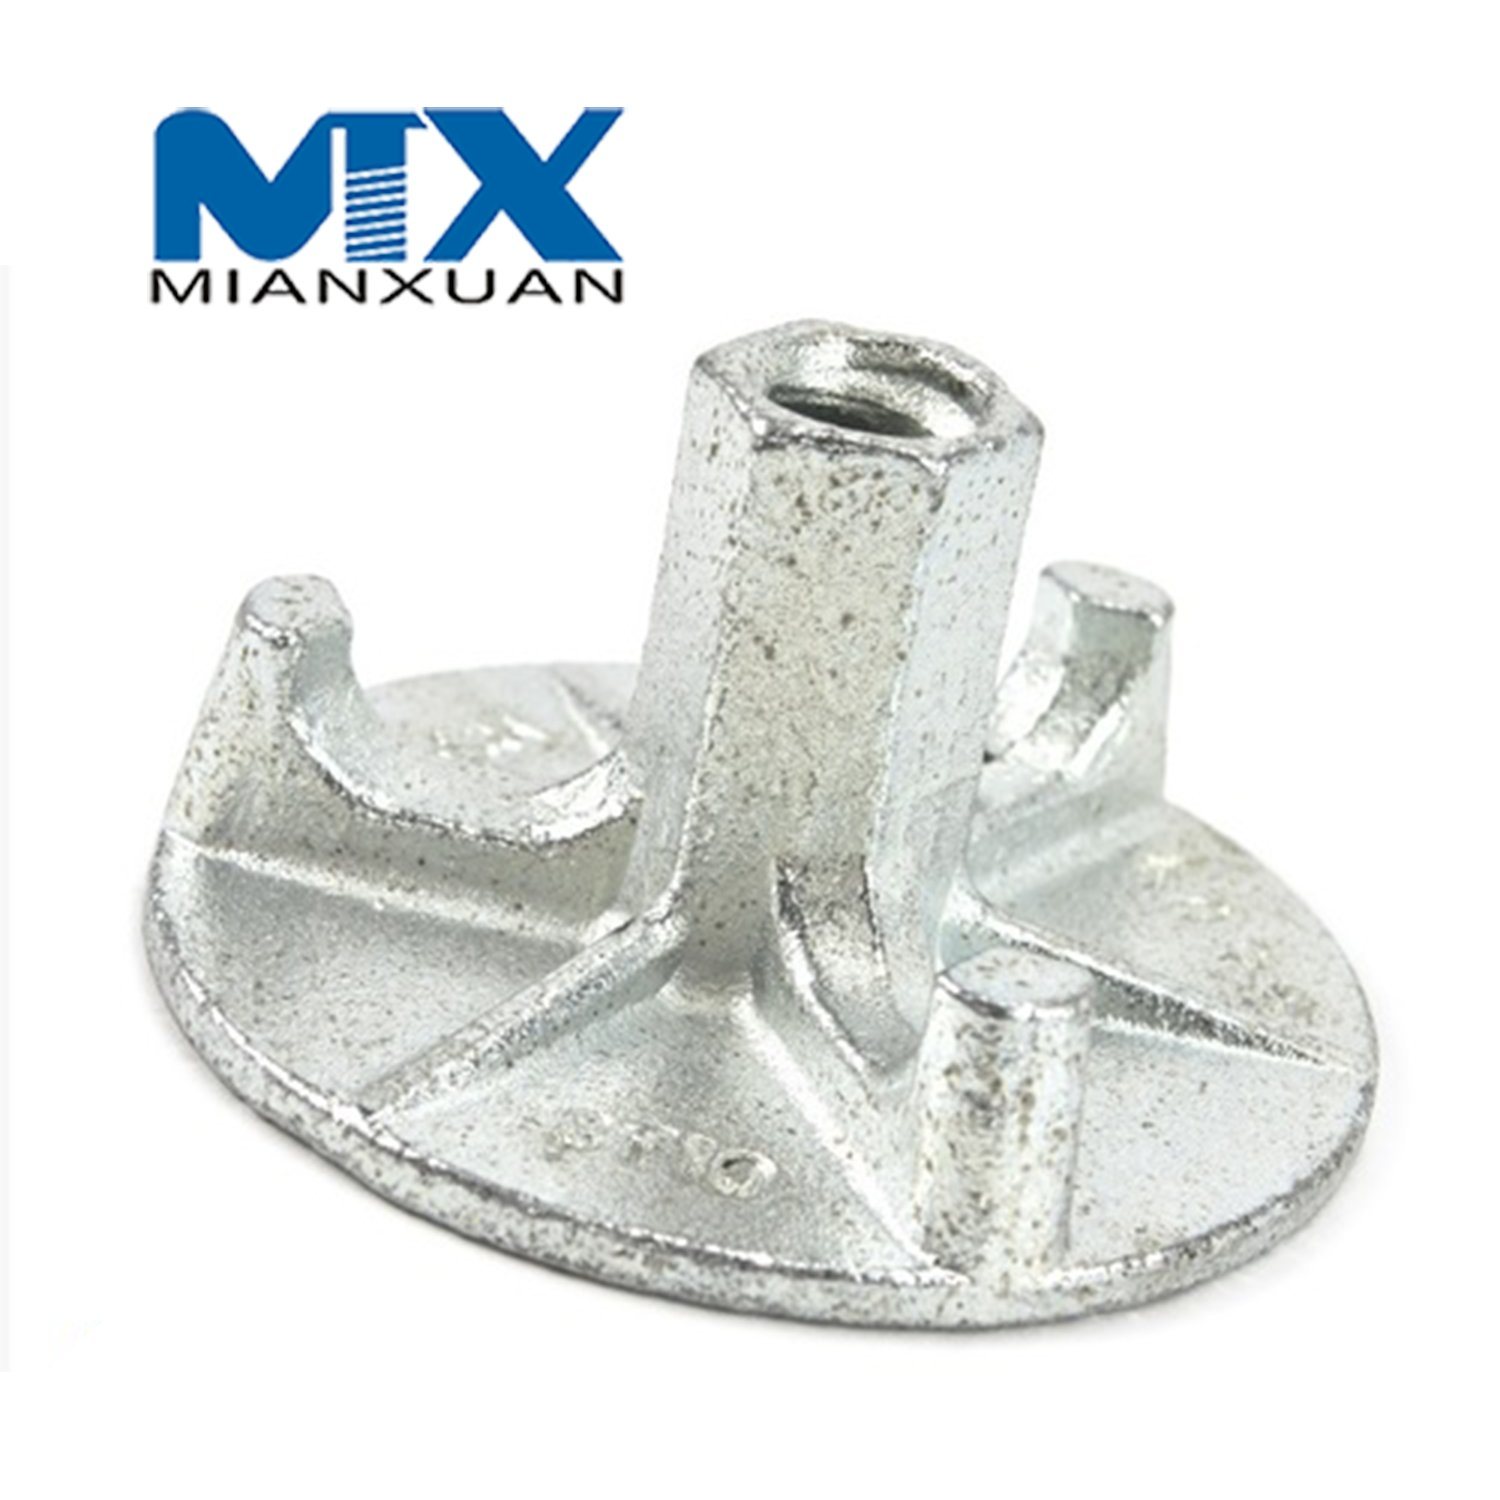 Scaffold Square Round Anchor Formwork Scaffolding Casted Plated Construction Tie Rod Casting Ductile Iron Wing Swivel Nut